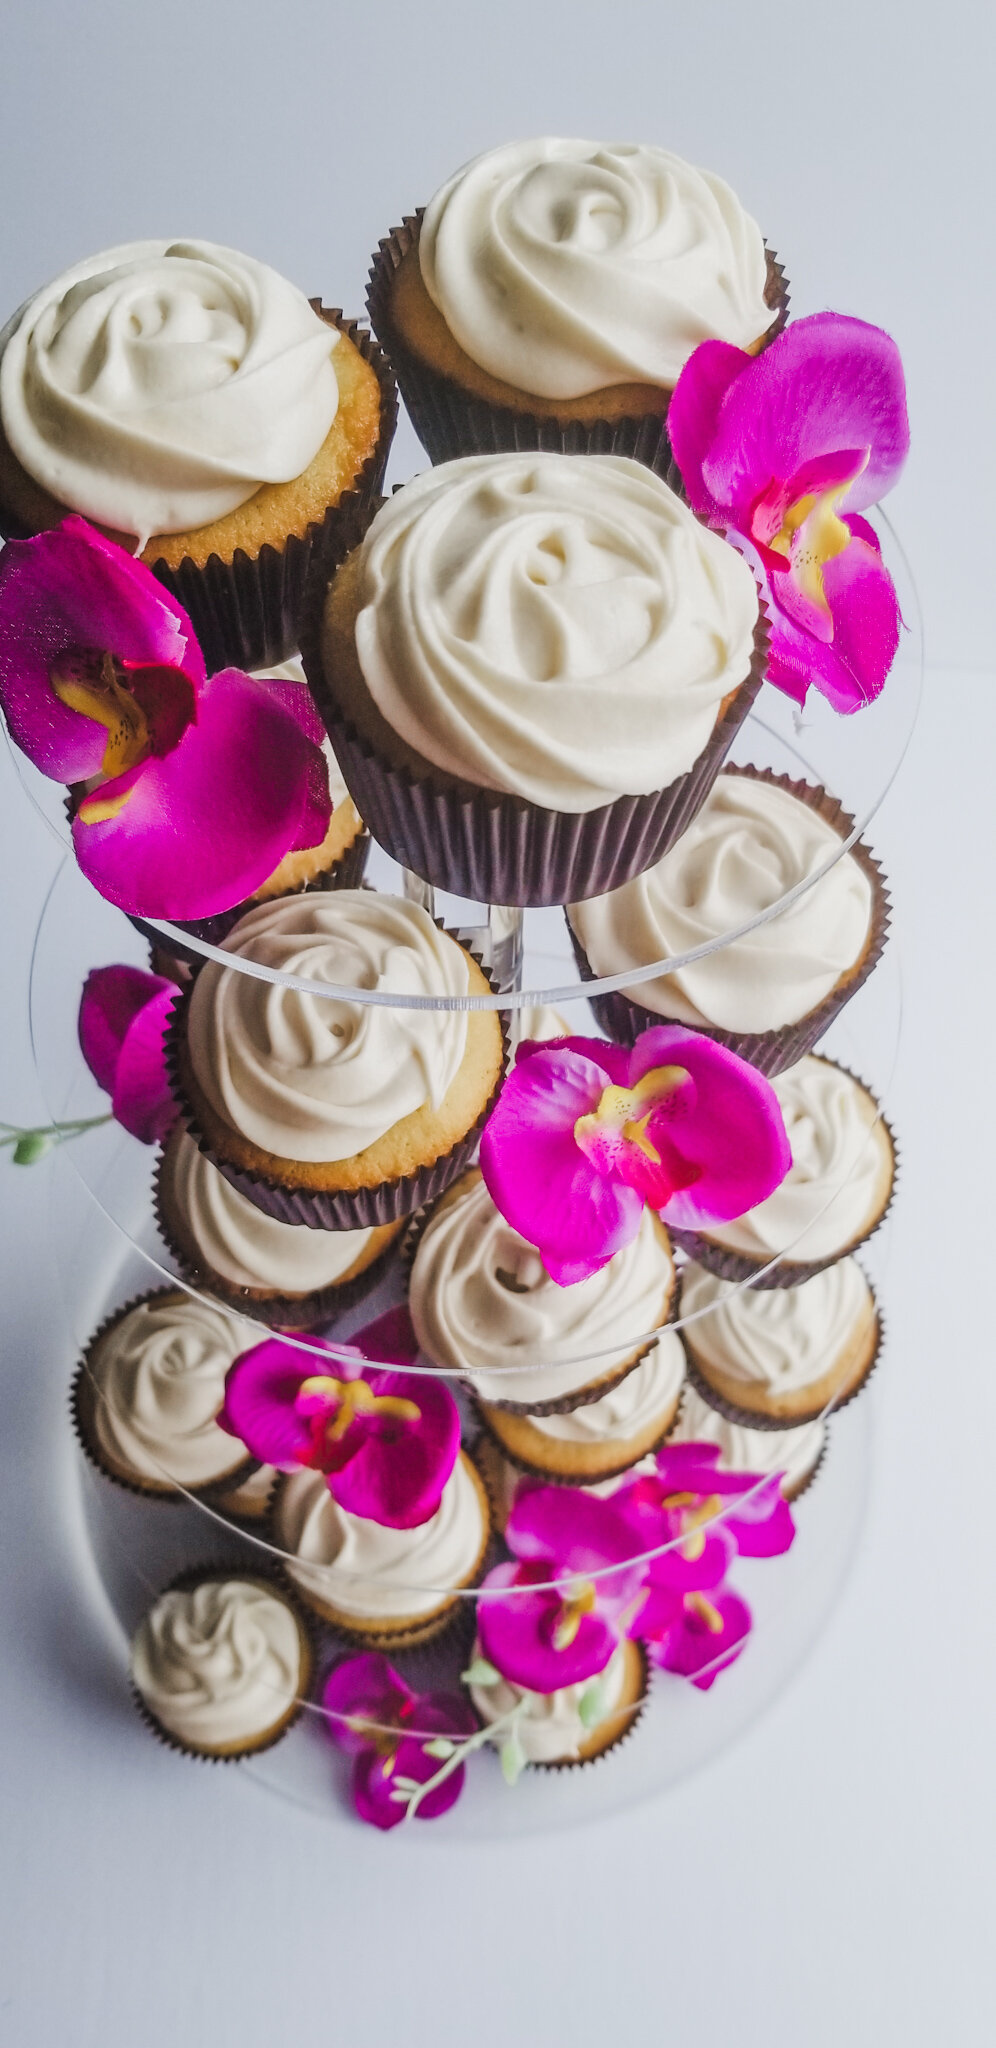 orchids cupcake tower.jpg